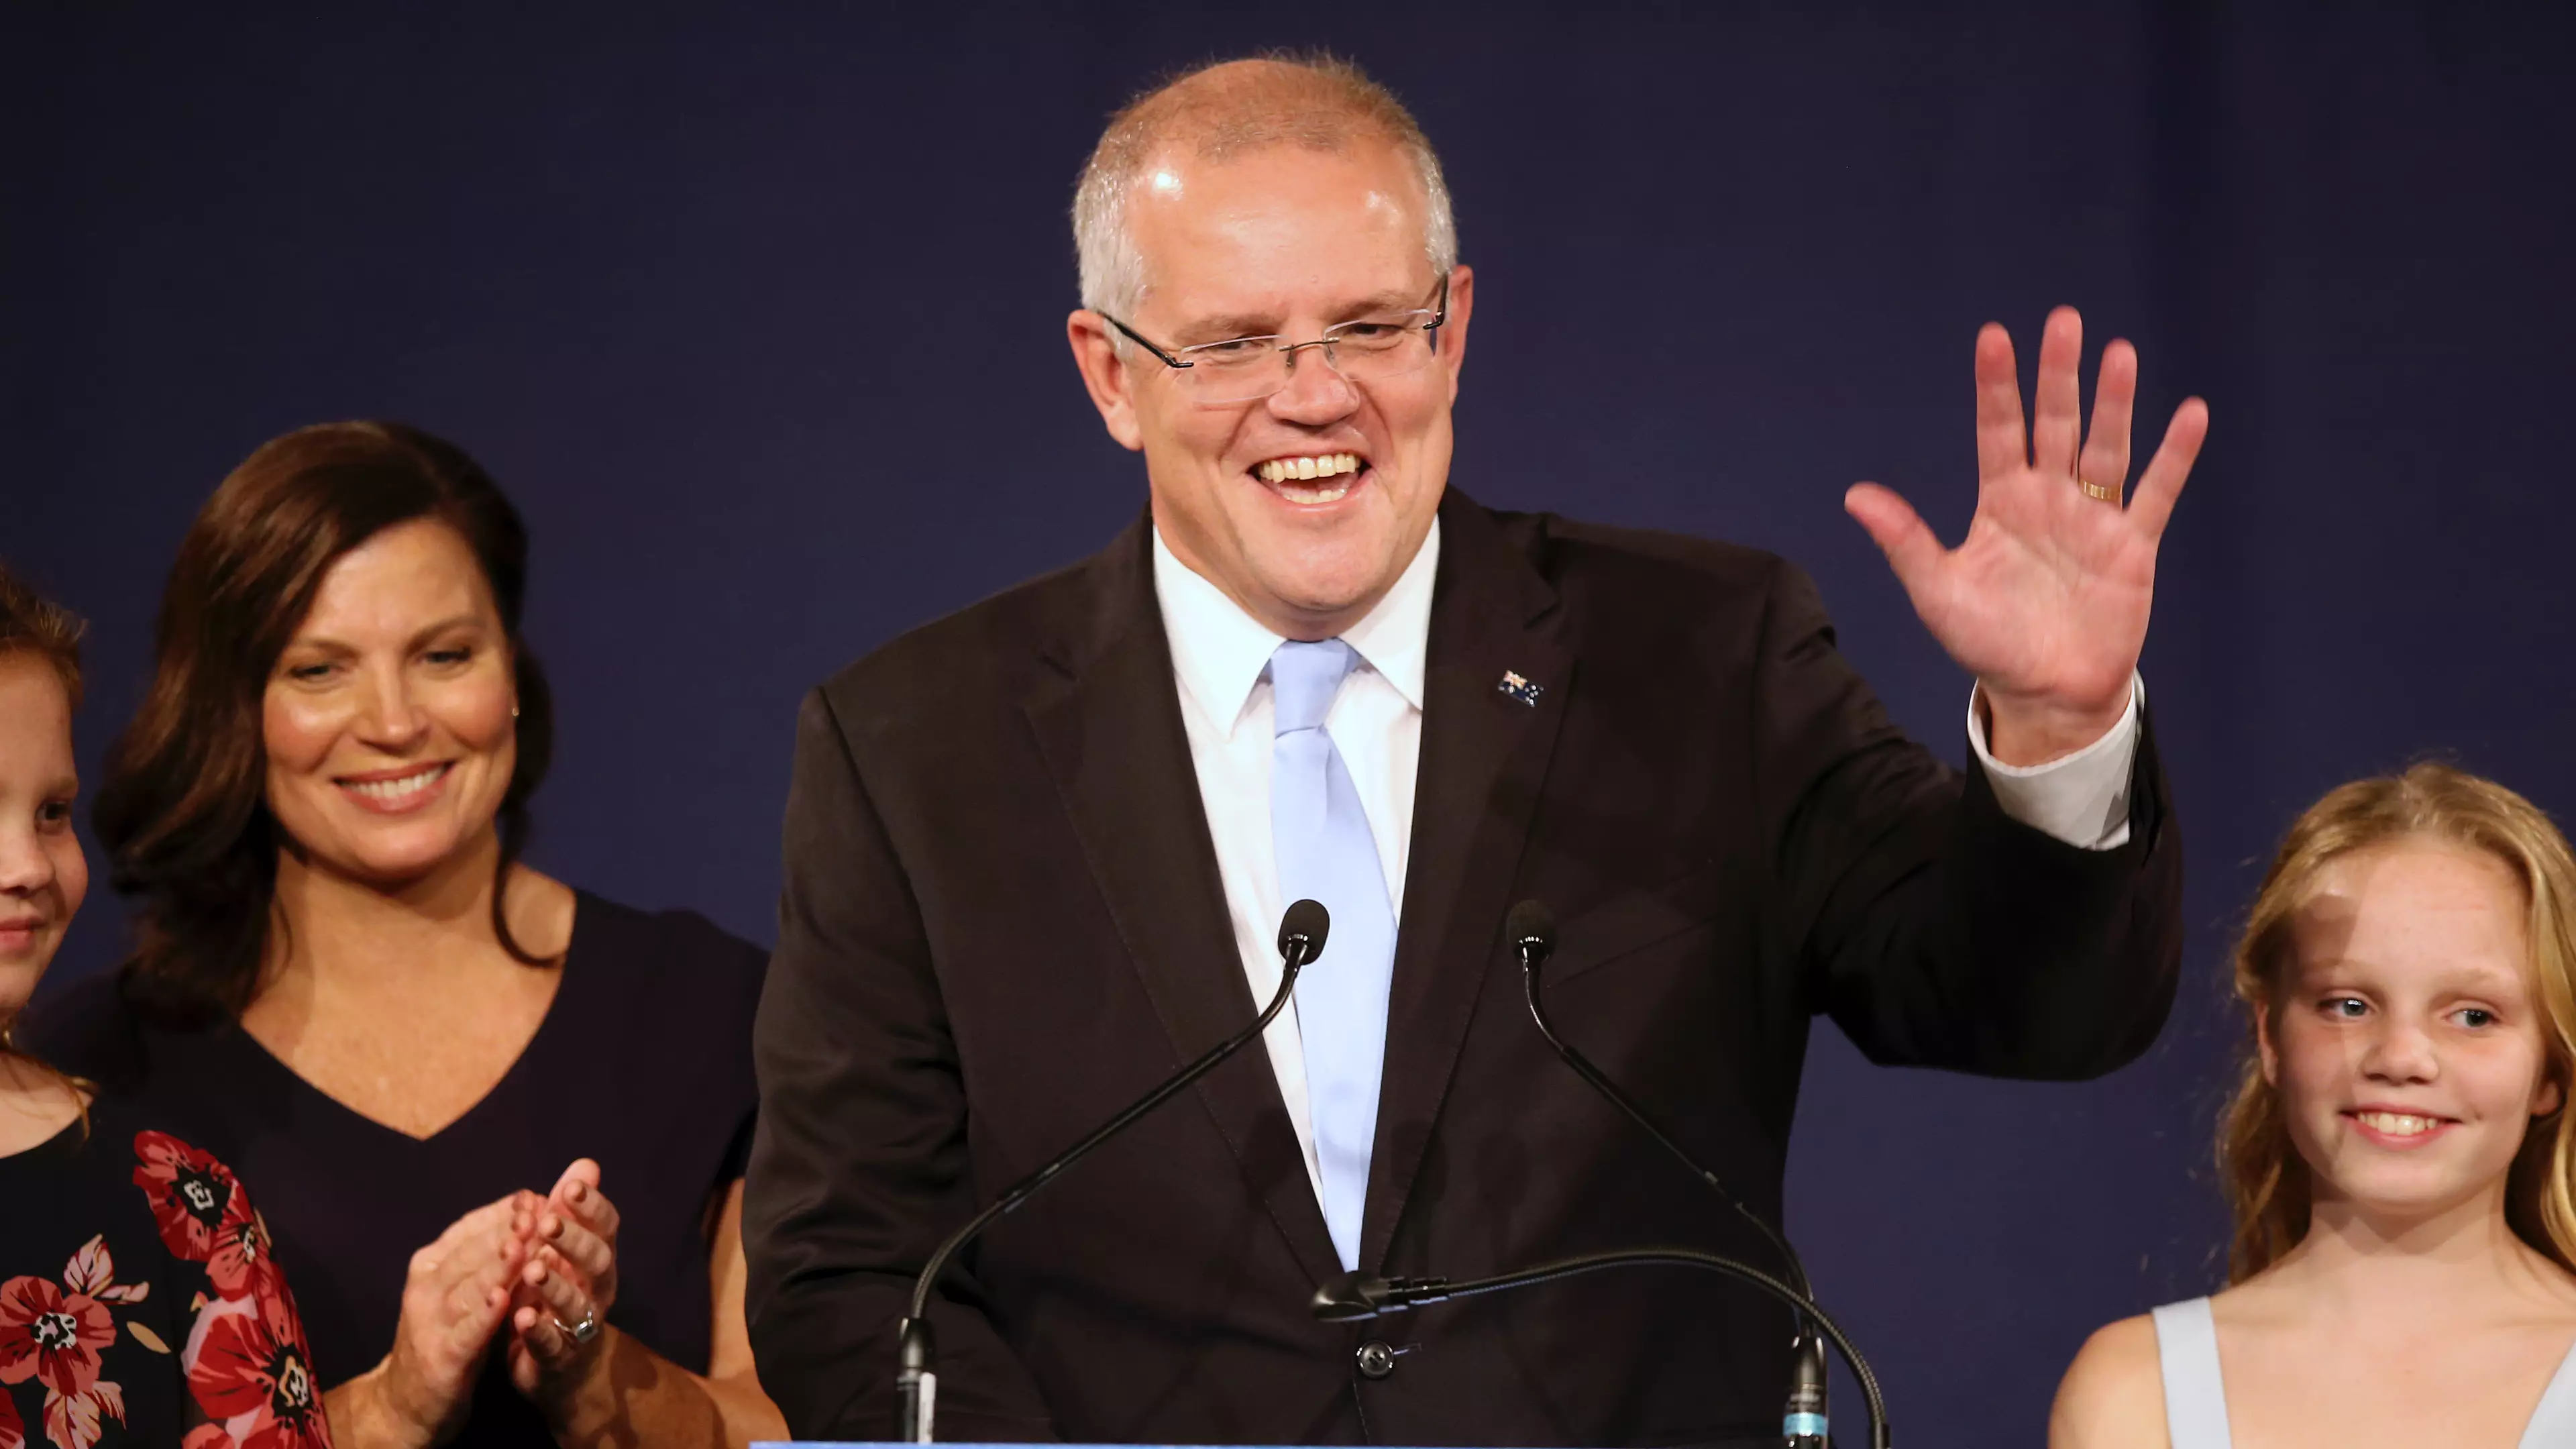 What The Morrison Government Means For Climate Change And Our Future